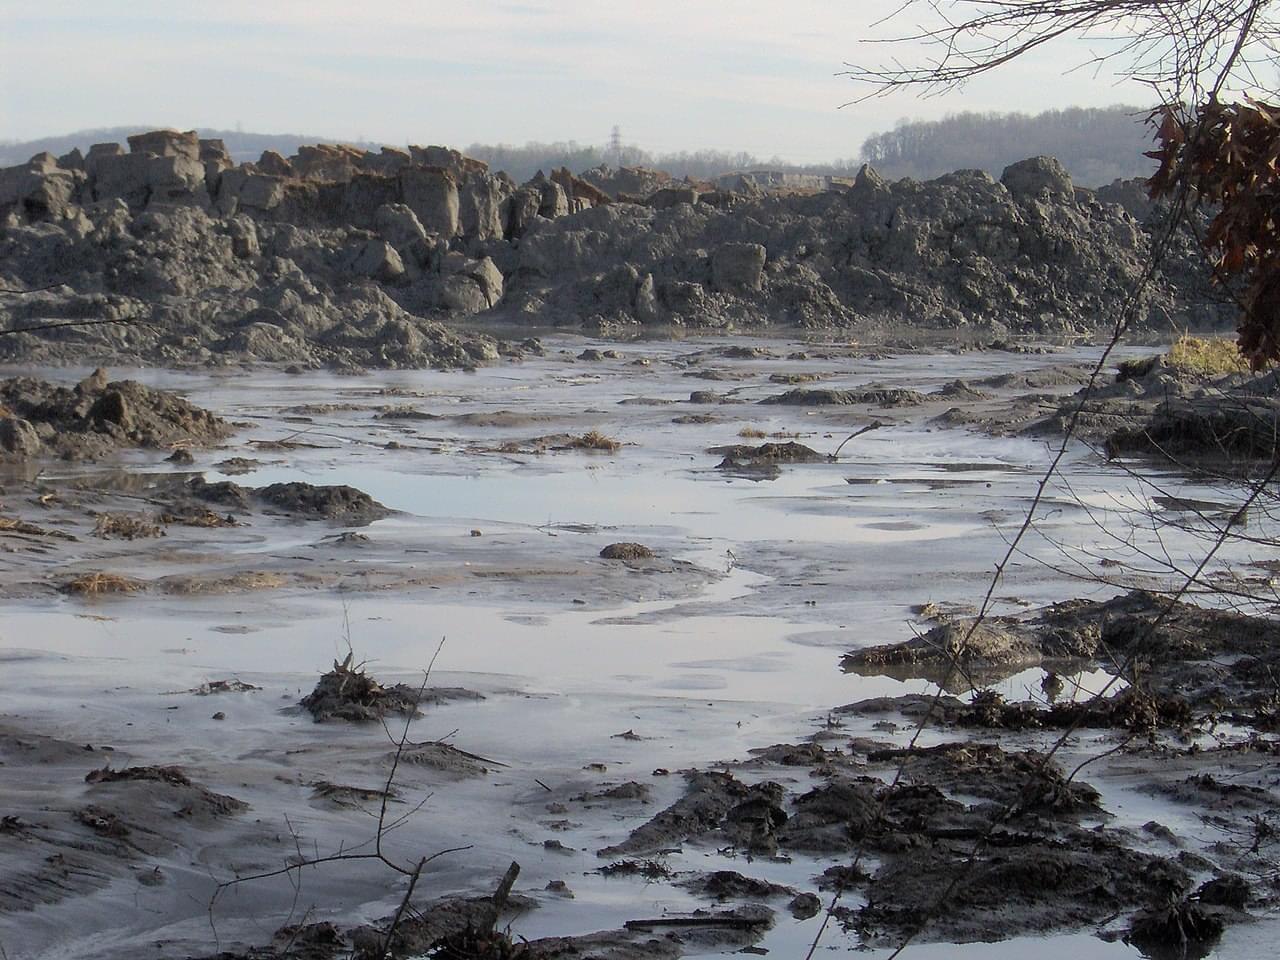 A view of the TVA Kingston Fossil Plant coal ash spill